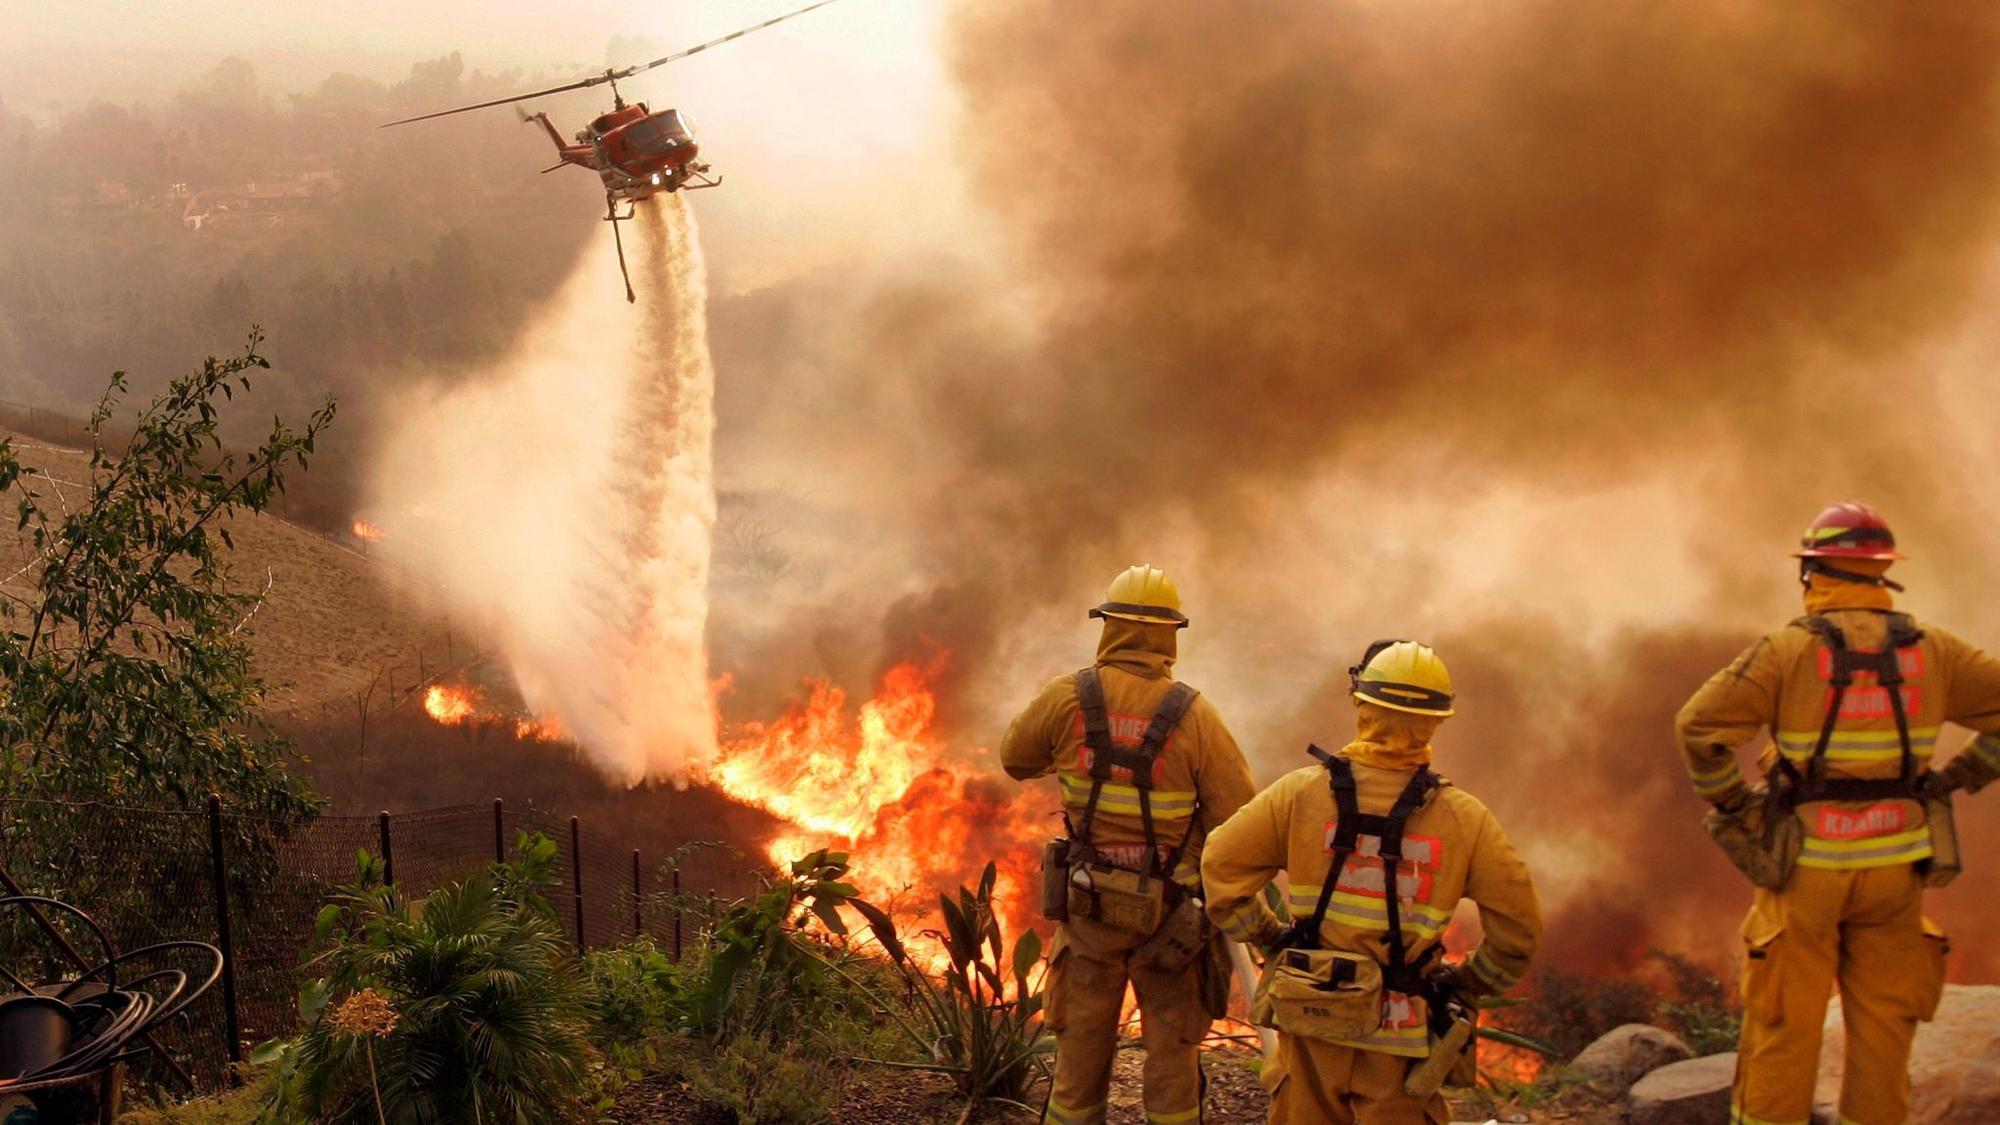 CPUC rules against SDG&E in 2007 wildfire case - The San Diego Union ...